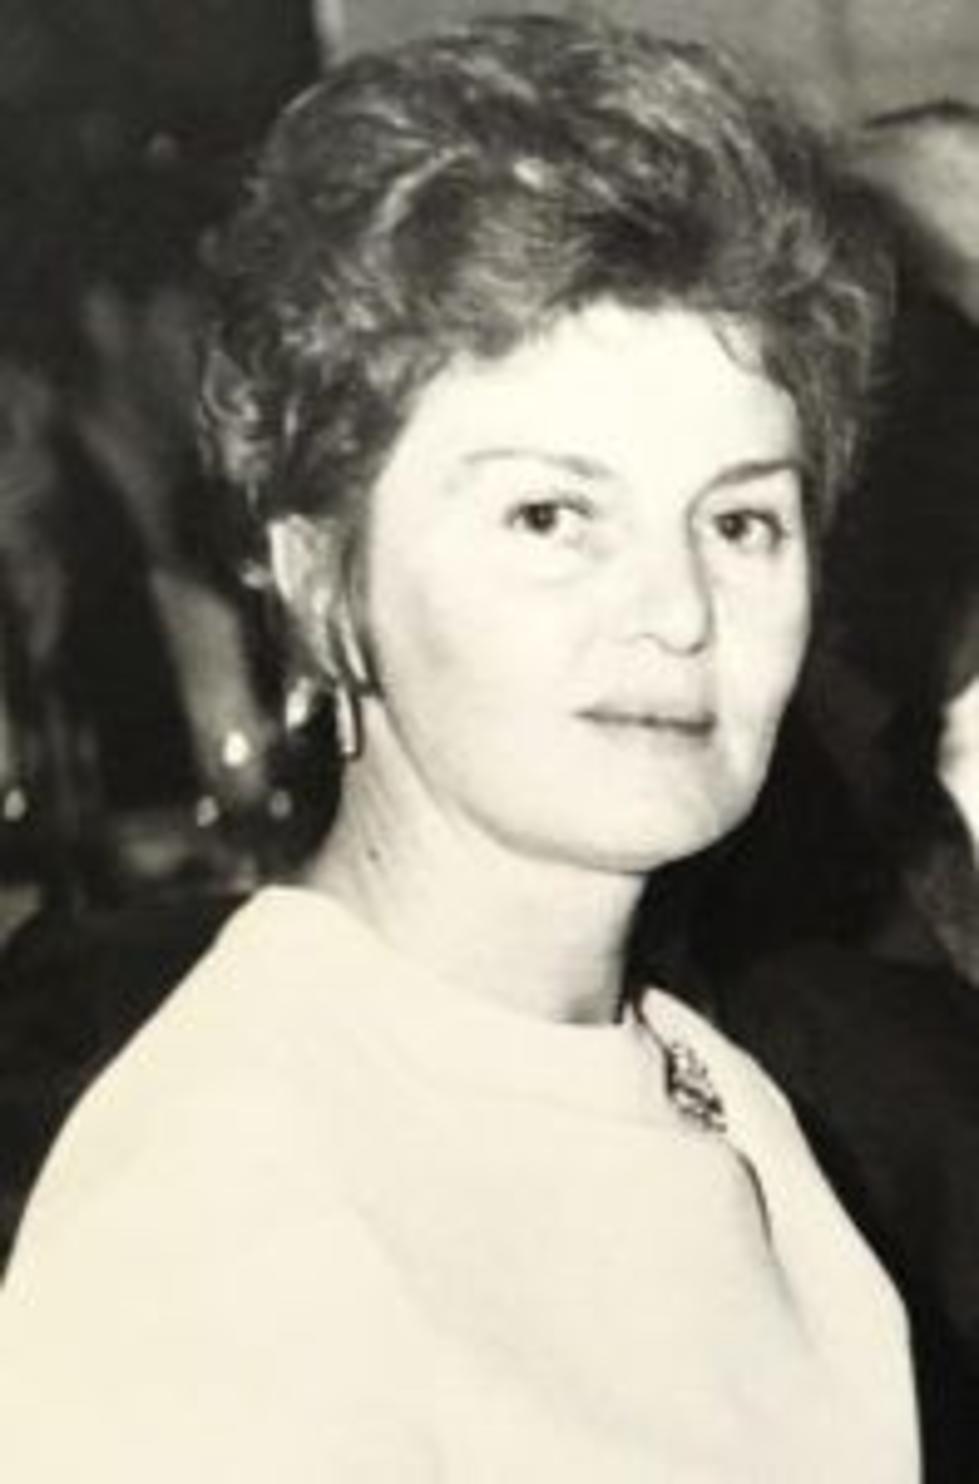 Obituary: Else Marie Andres